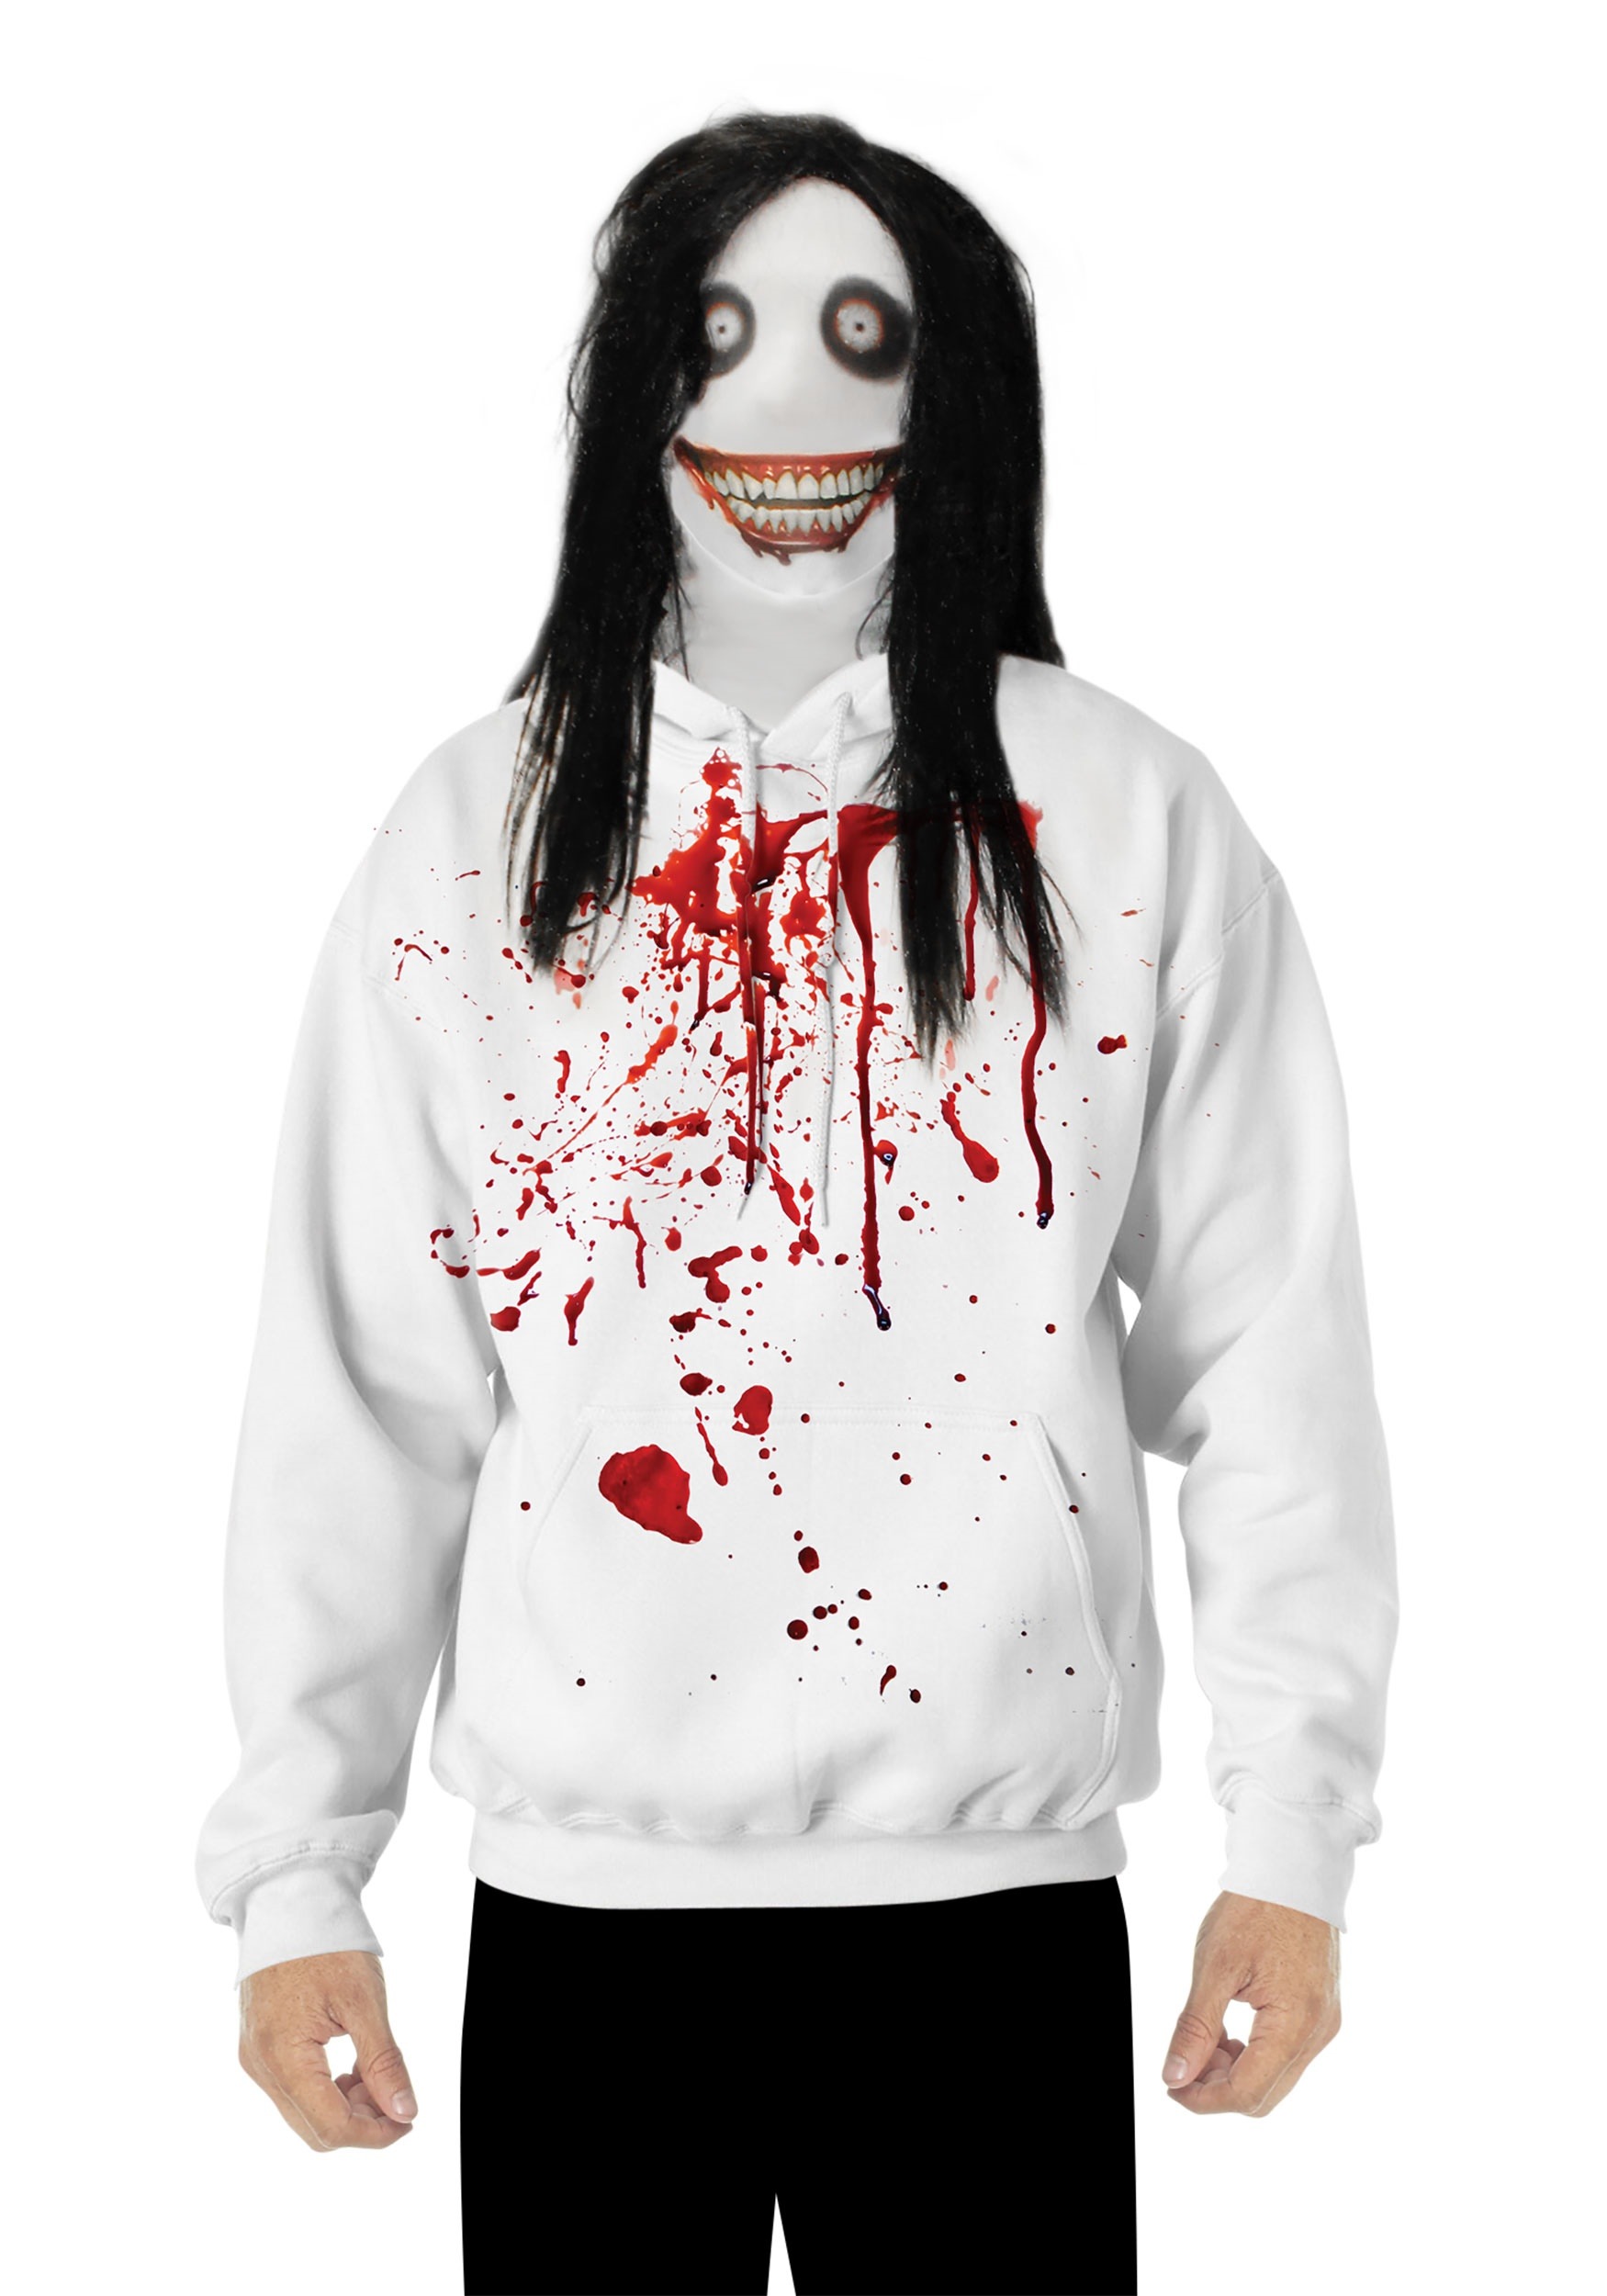 Creepy Killer Costume for Adults. killer outfit. 